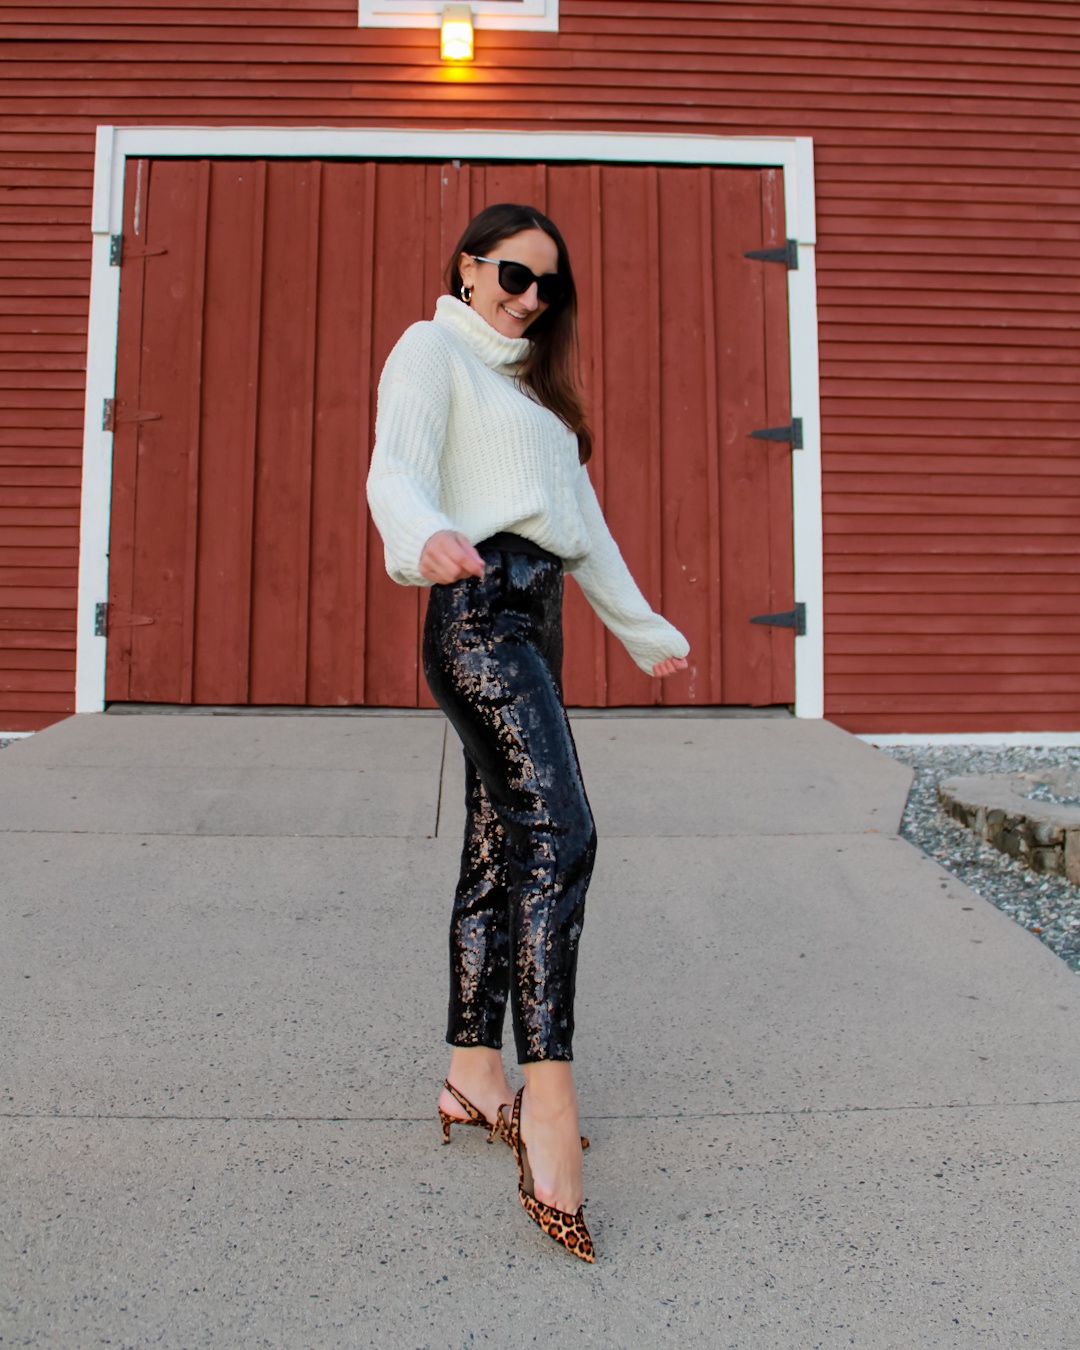 Velvet Pants Outfits For Women (23 ideas & outfits)